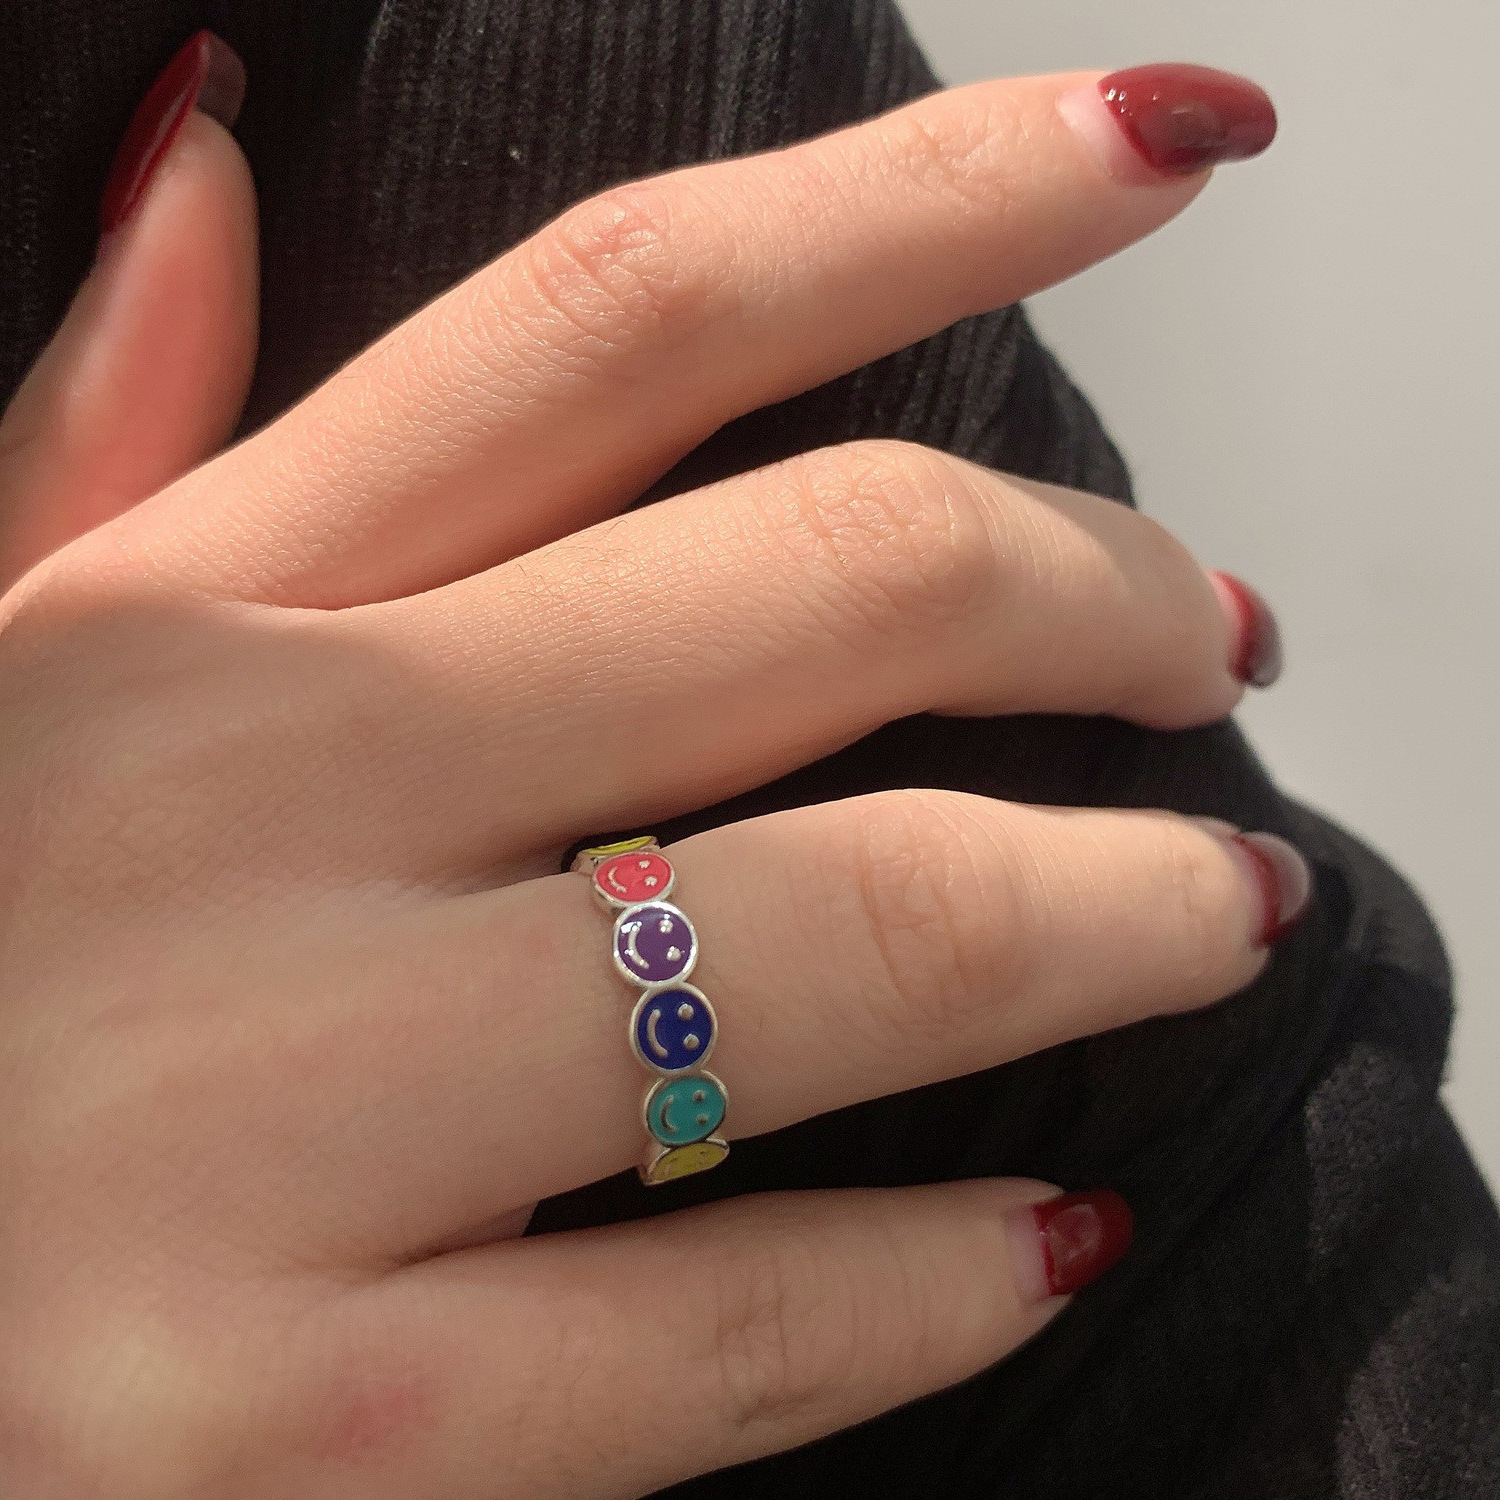 Rainbow Smiley Ring Women's Fashion Temperament Personality S925 Silver Opening Ring Retro Hip Hop Creative Index Finger Ring Fashion